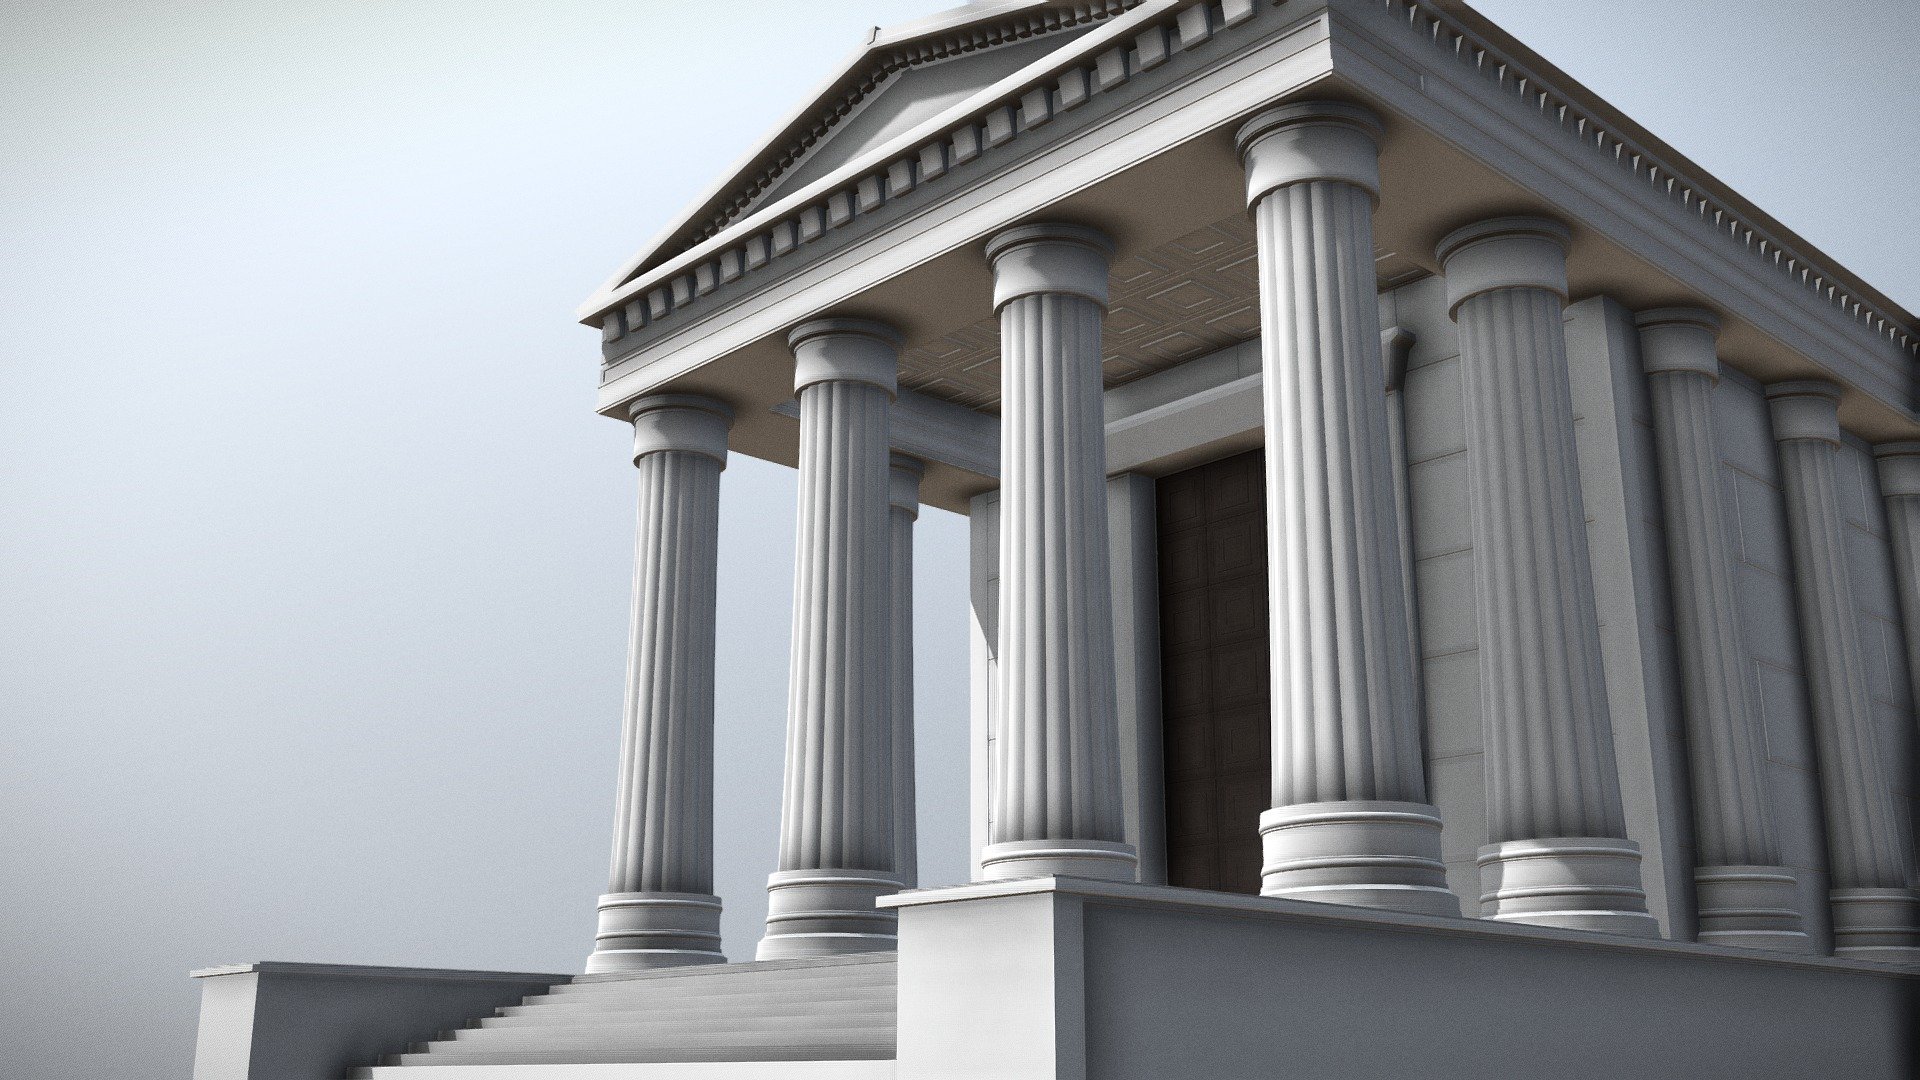 This is based off of a roman temple I saw, hope you like it! (:
I haven't textured it yet to make it more realistic, but this is what I've done so far. I hope to add more to this and create other structures that can go along with it 3d model